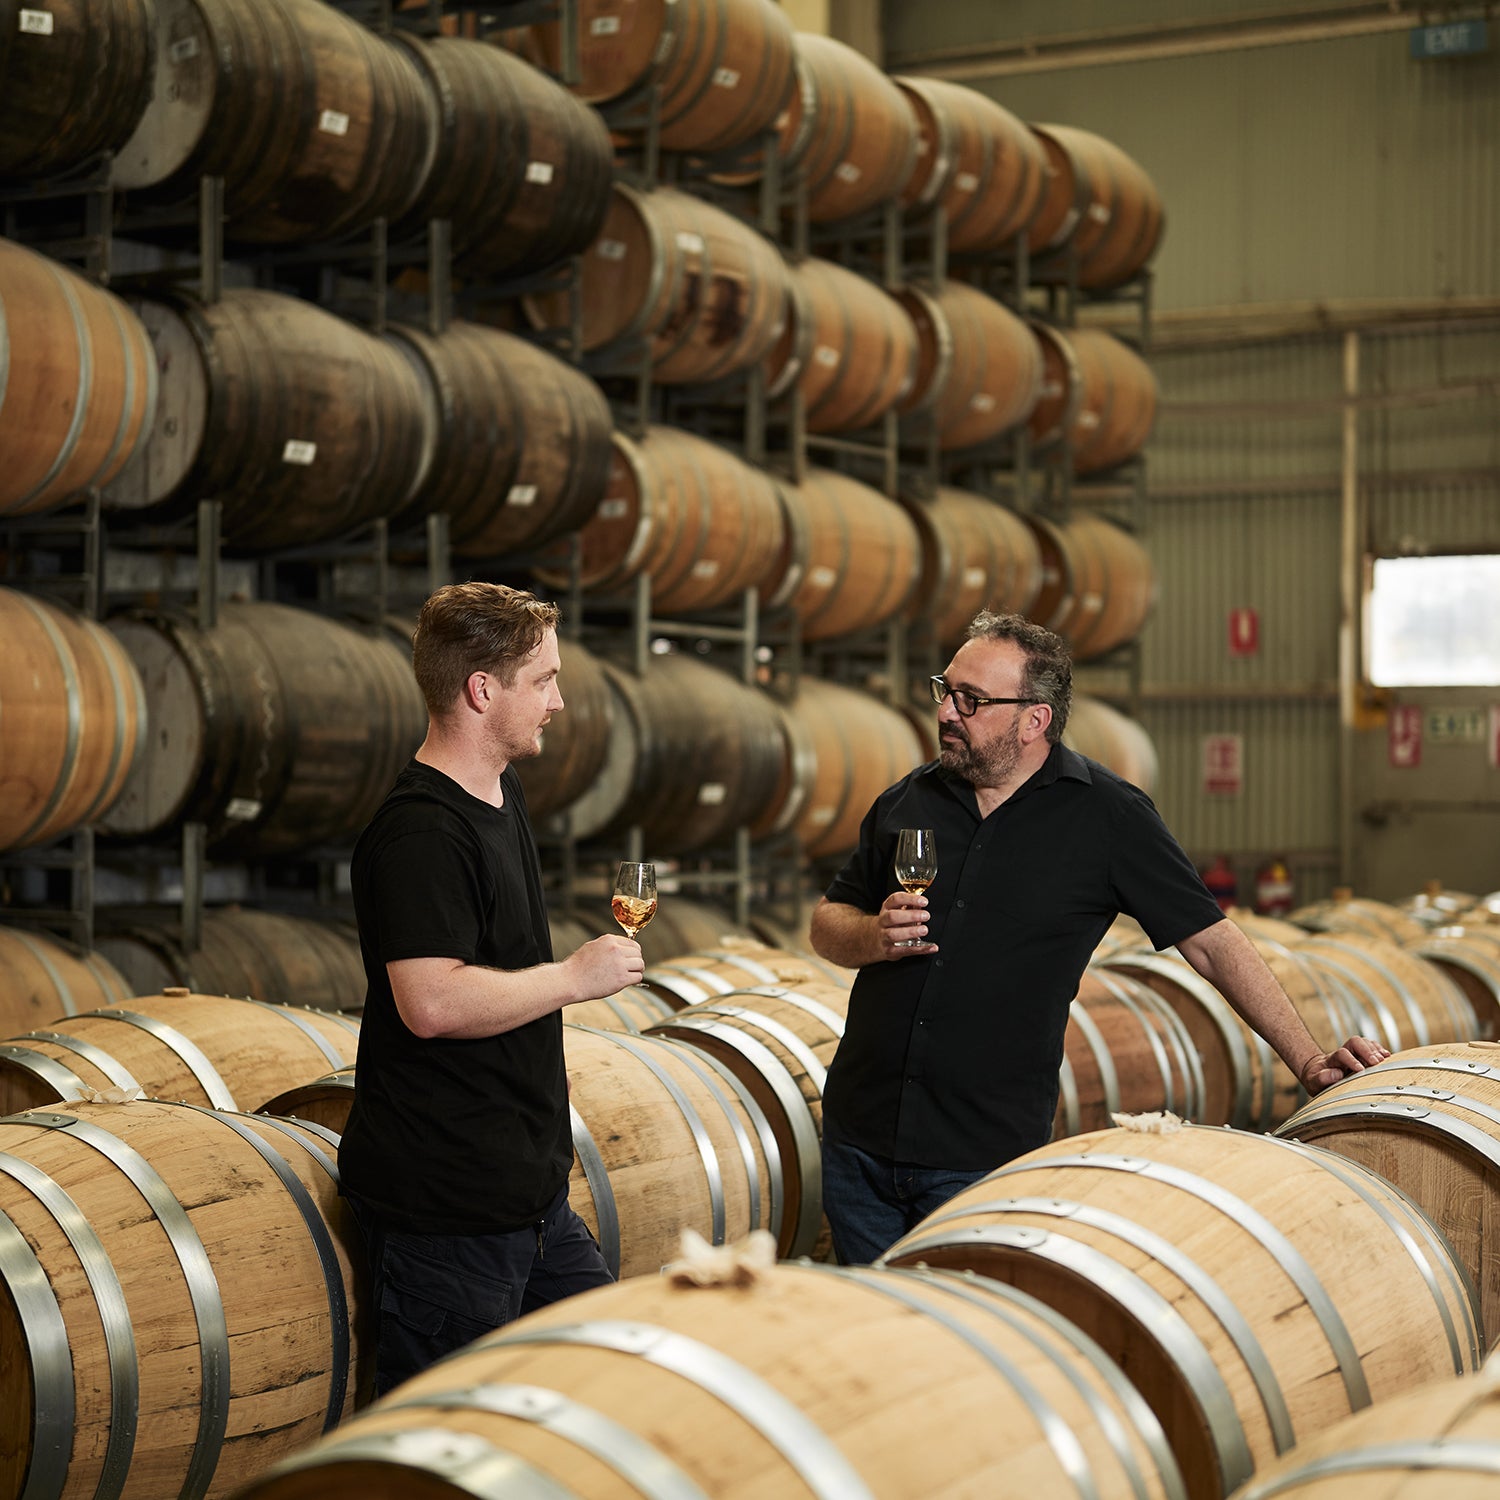 Ad Astra Per Whisky-A: Australia's Starward Whisky Debuts on U.S. Shores -  The Manual